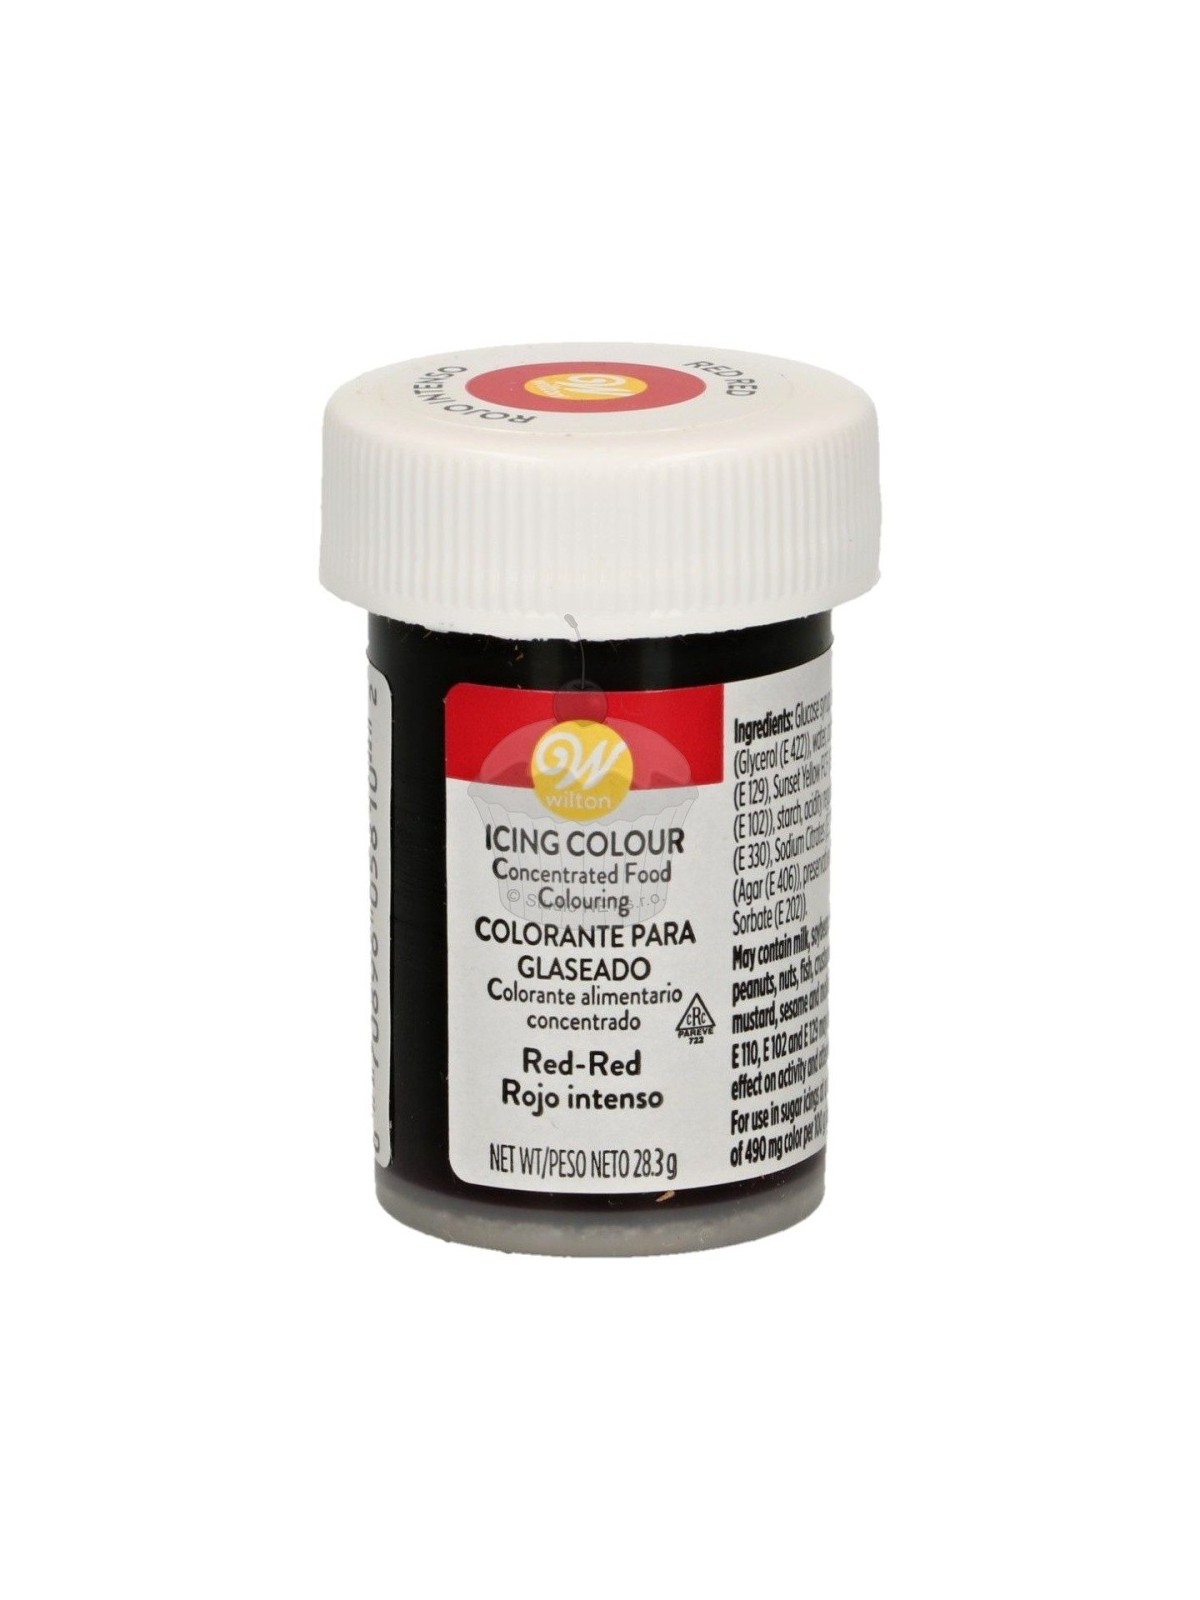 Wilton Icing Color Red-Red Gel 28g